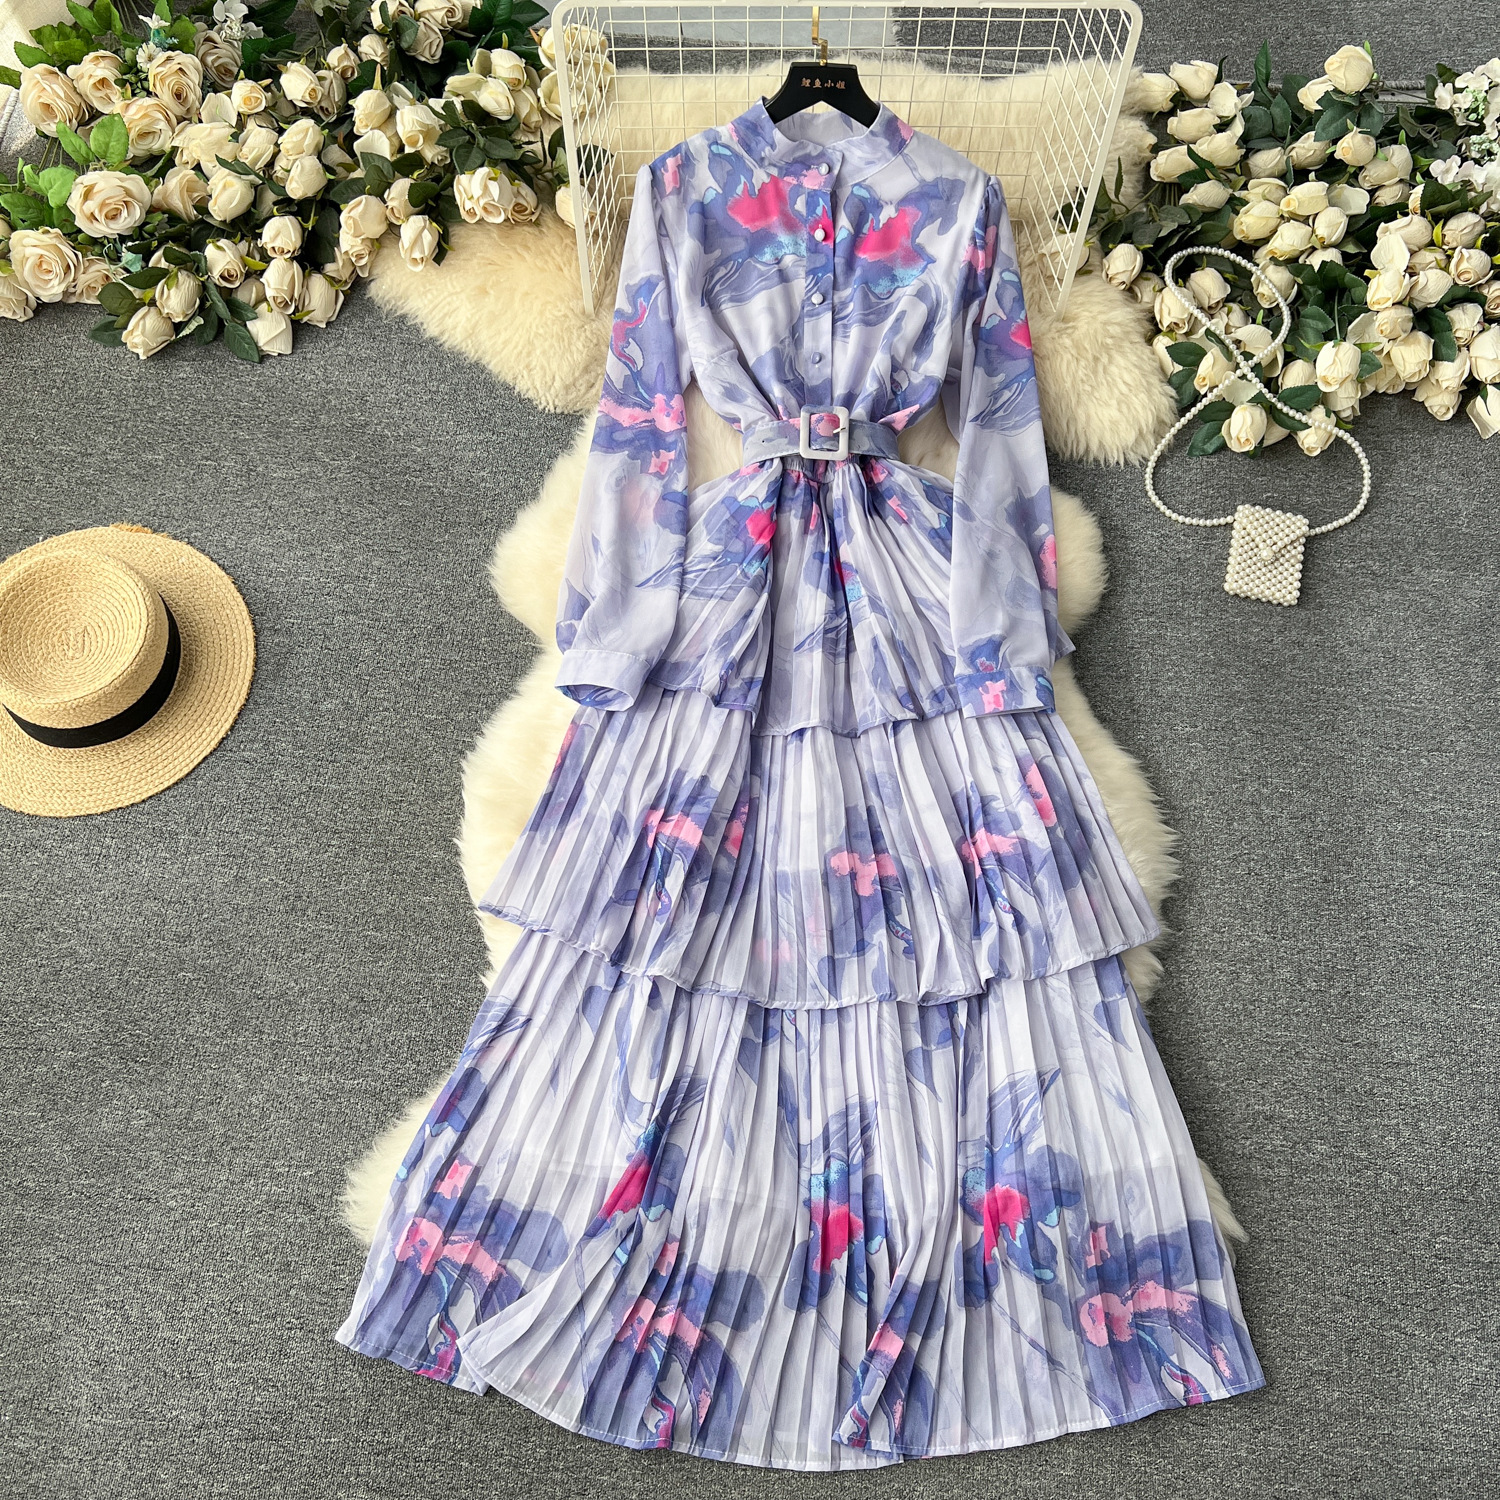 2024 early spring new French gentle style printed chiffon dress women's pleated ruffled edge cake skirt holiday skirt